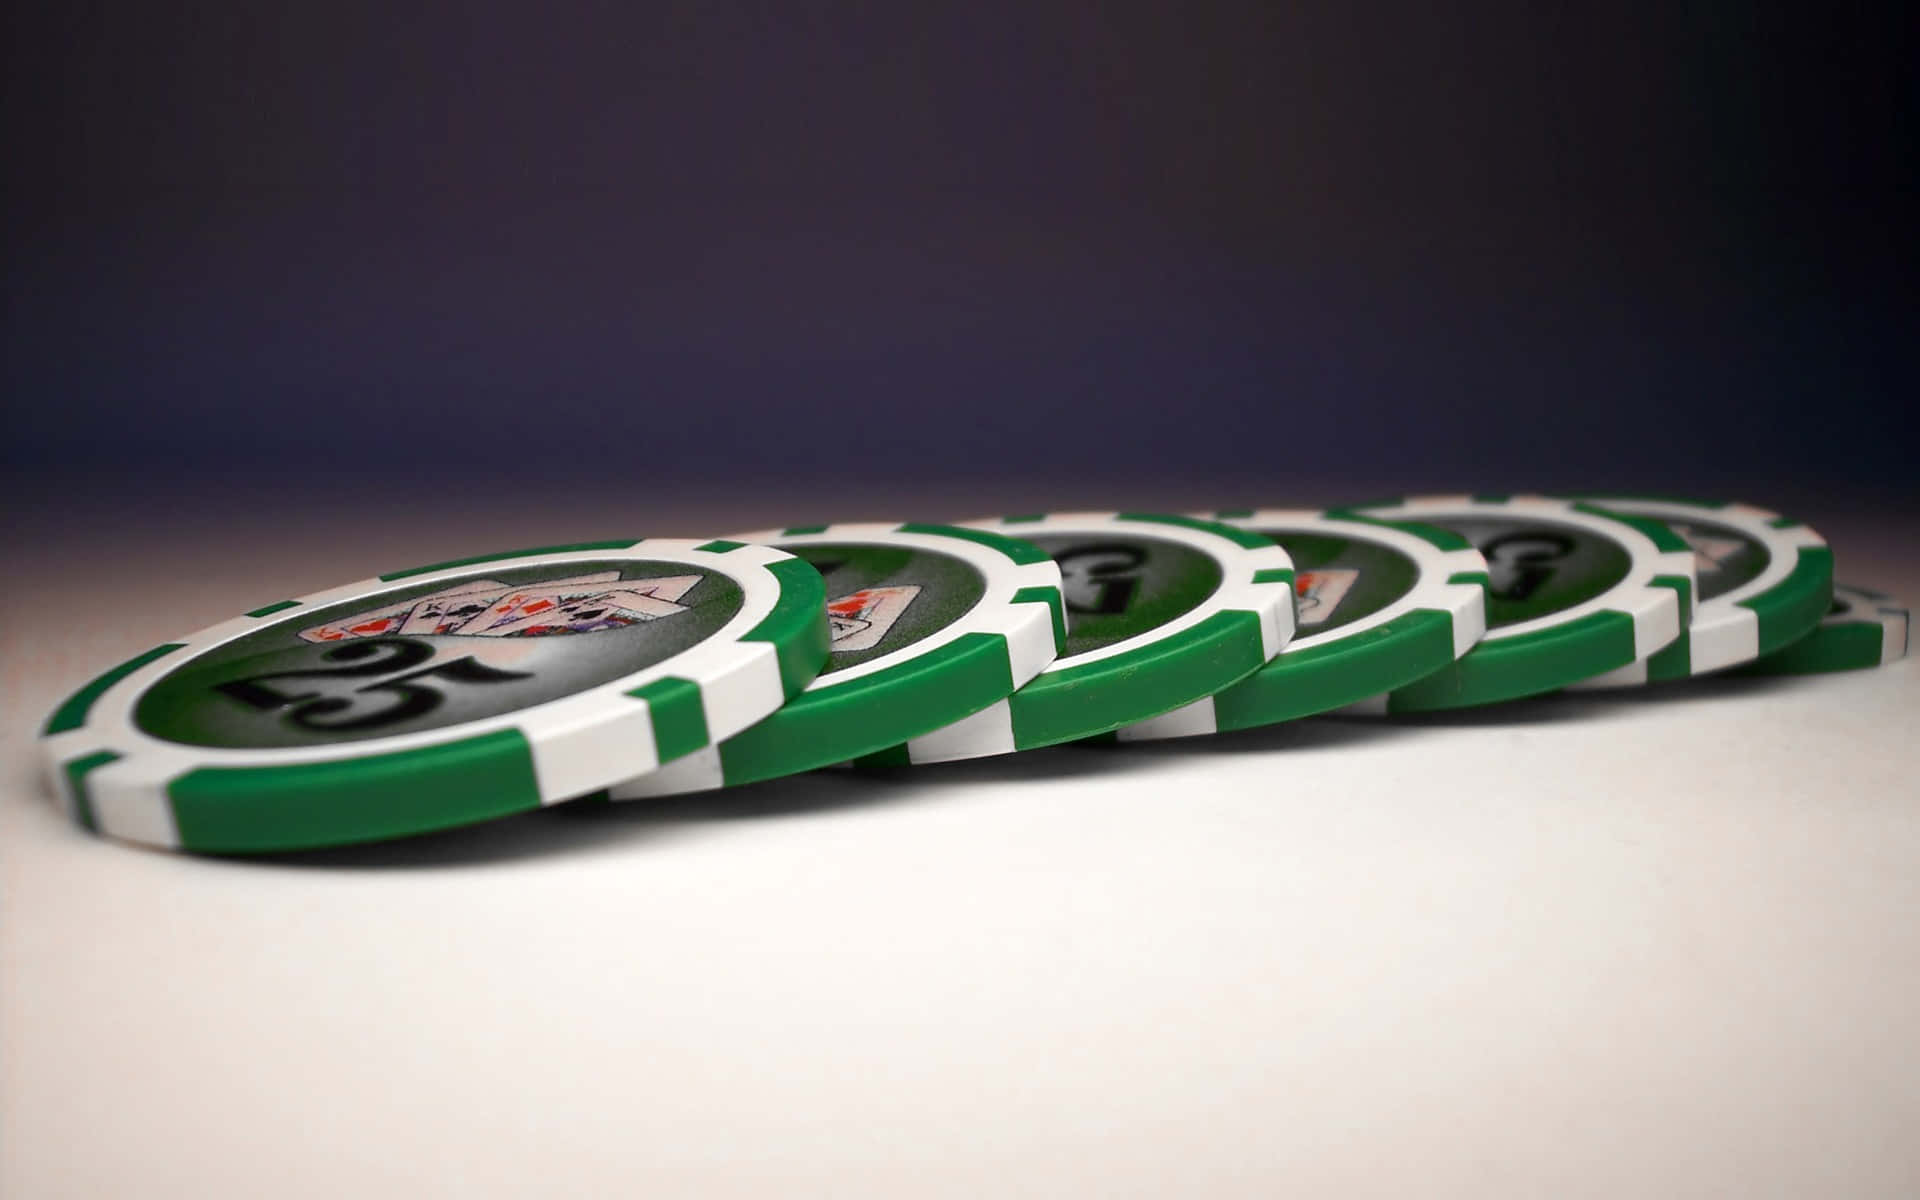 Enjoy a game of poker with friends in the comfort of your own home